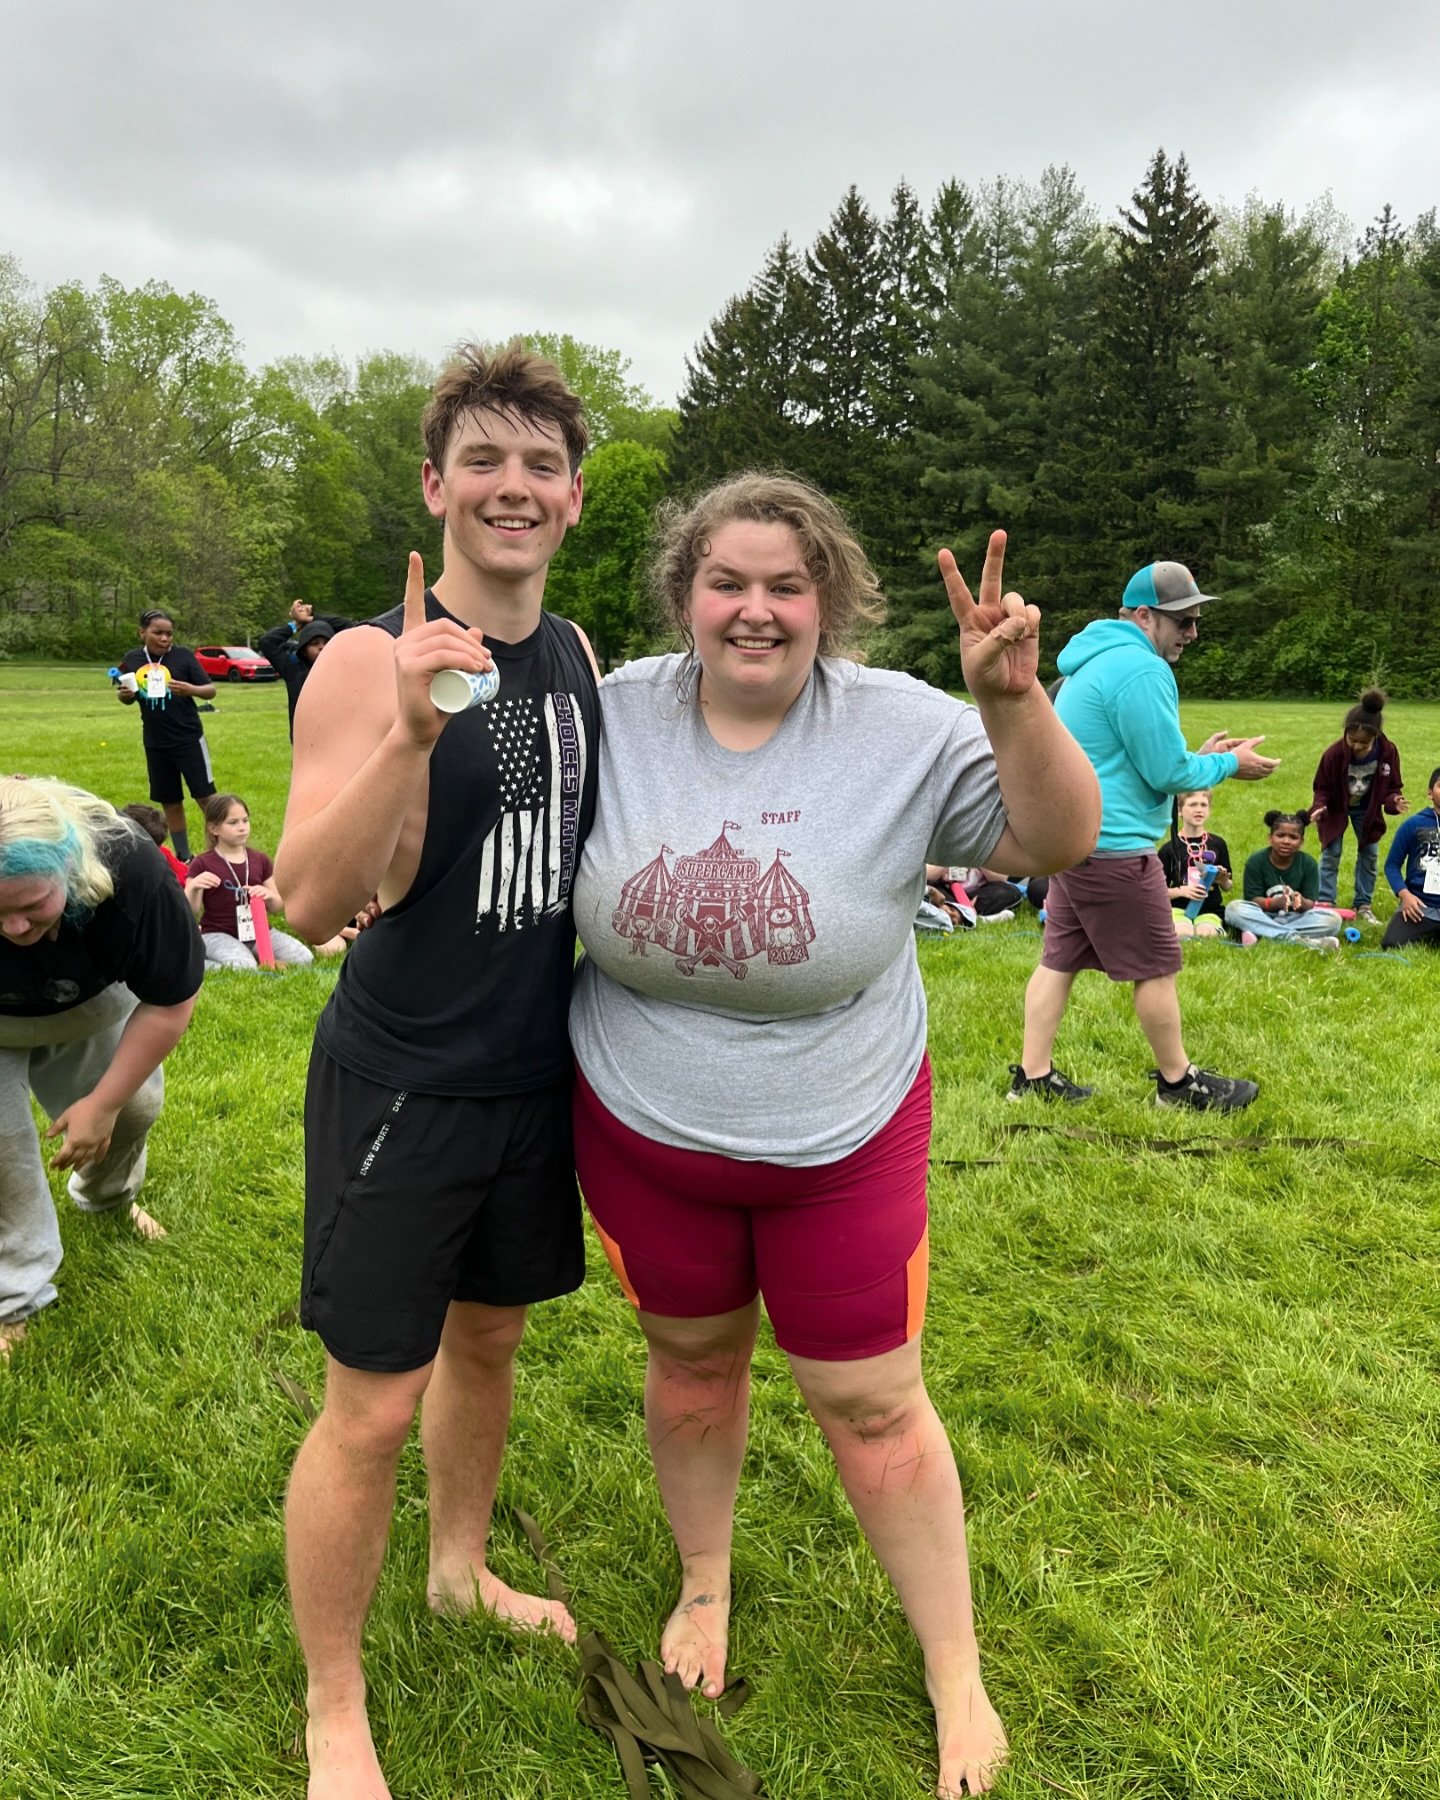 Shout out to this year&rsquo;s counselor slaughter champs @evanb2428 &amp; @sha.hay.hay  Again, no permanent injuries, just skinned knees and sore muscles! #riskyplay #tradition #voluntary